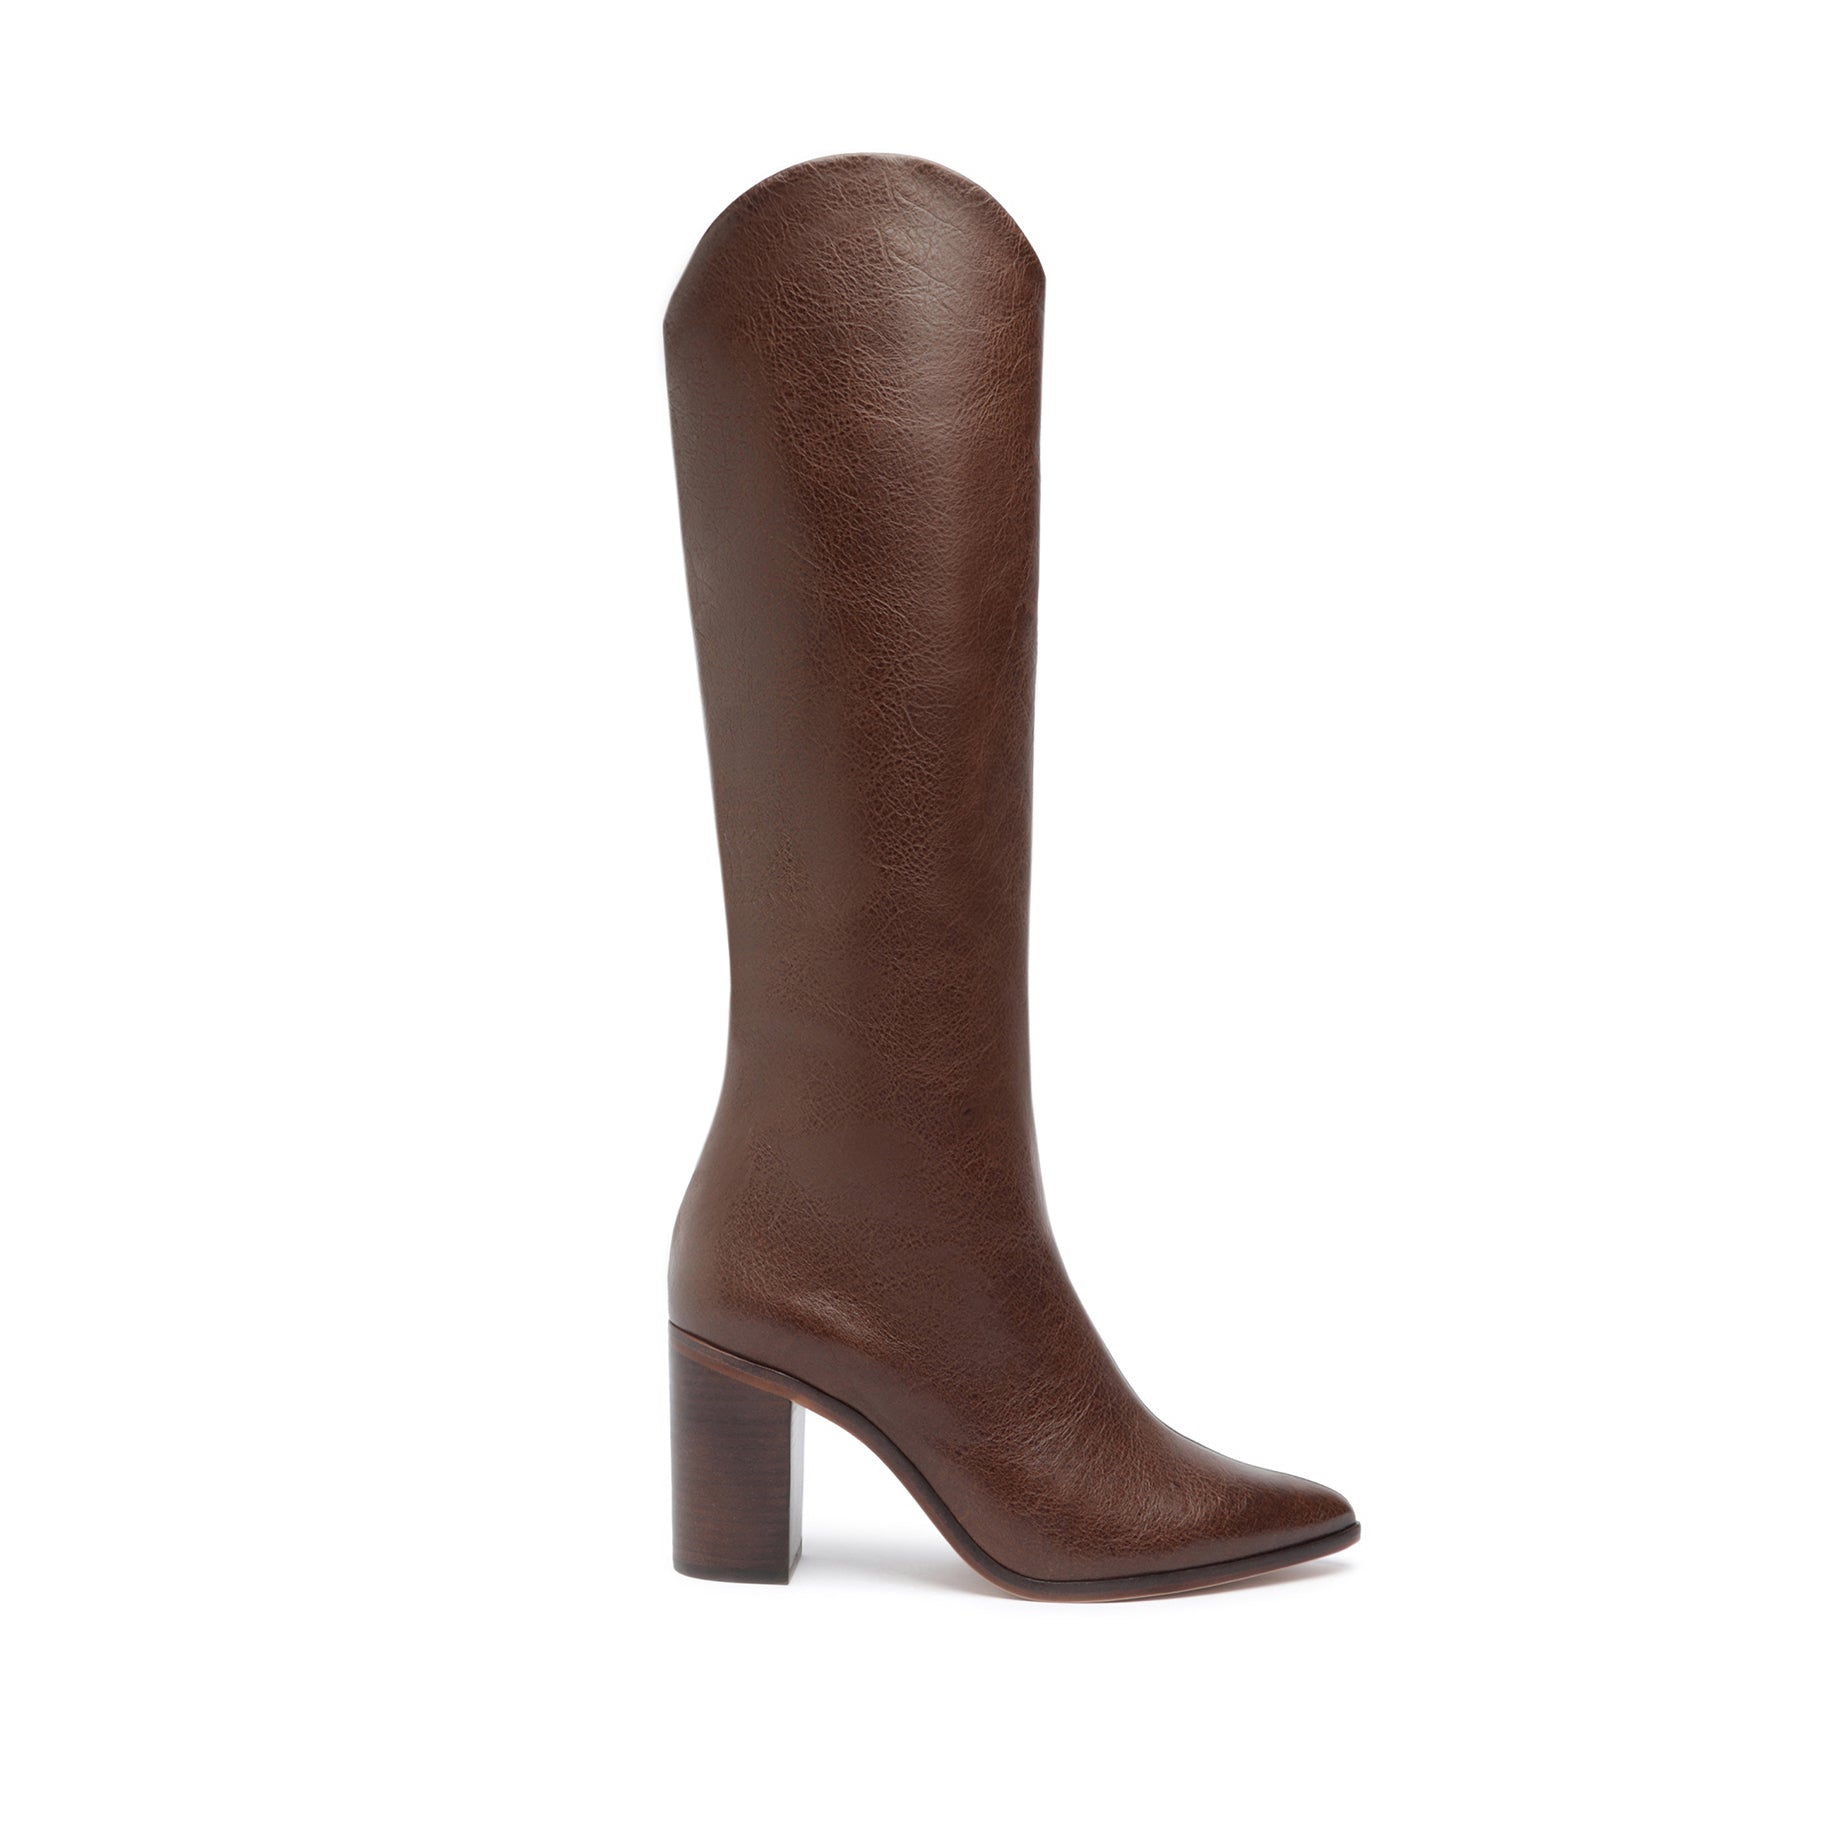 Buy Delize Women's Tan Casual Booties for Women at Best Price @ Tata CLiQ